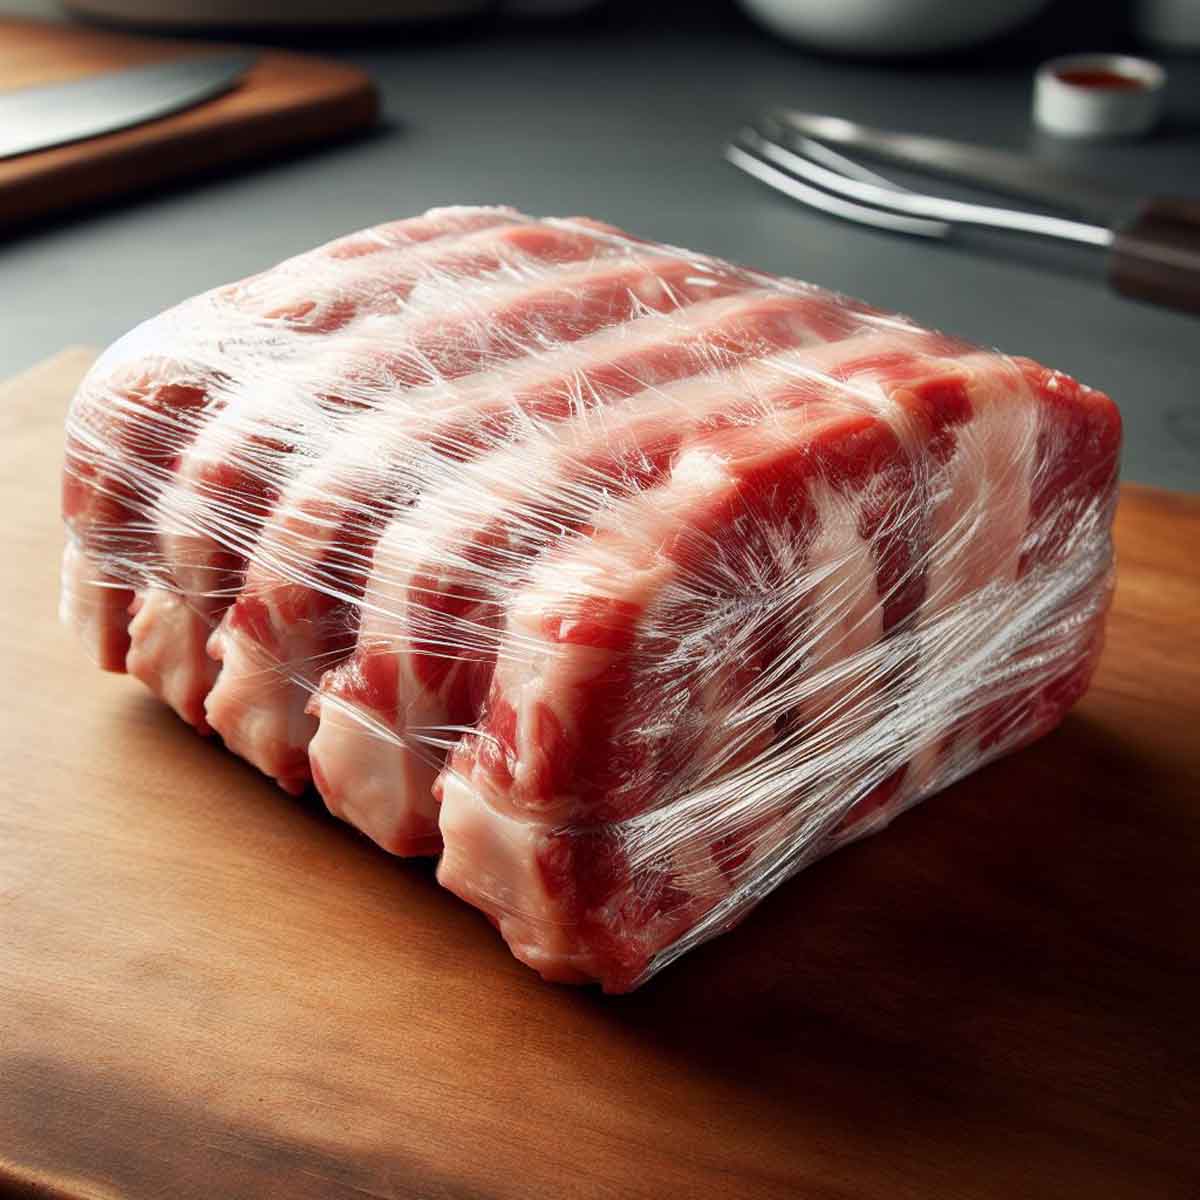 Process of packaging ribs for the freezer, showing tight and secure wrapping in heavy-duty material.